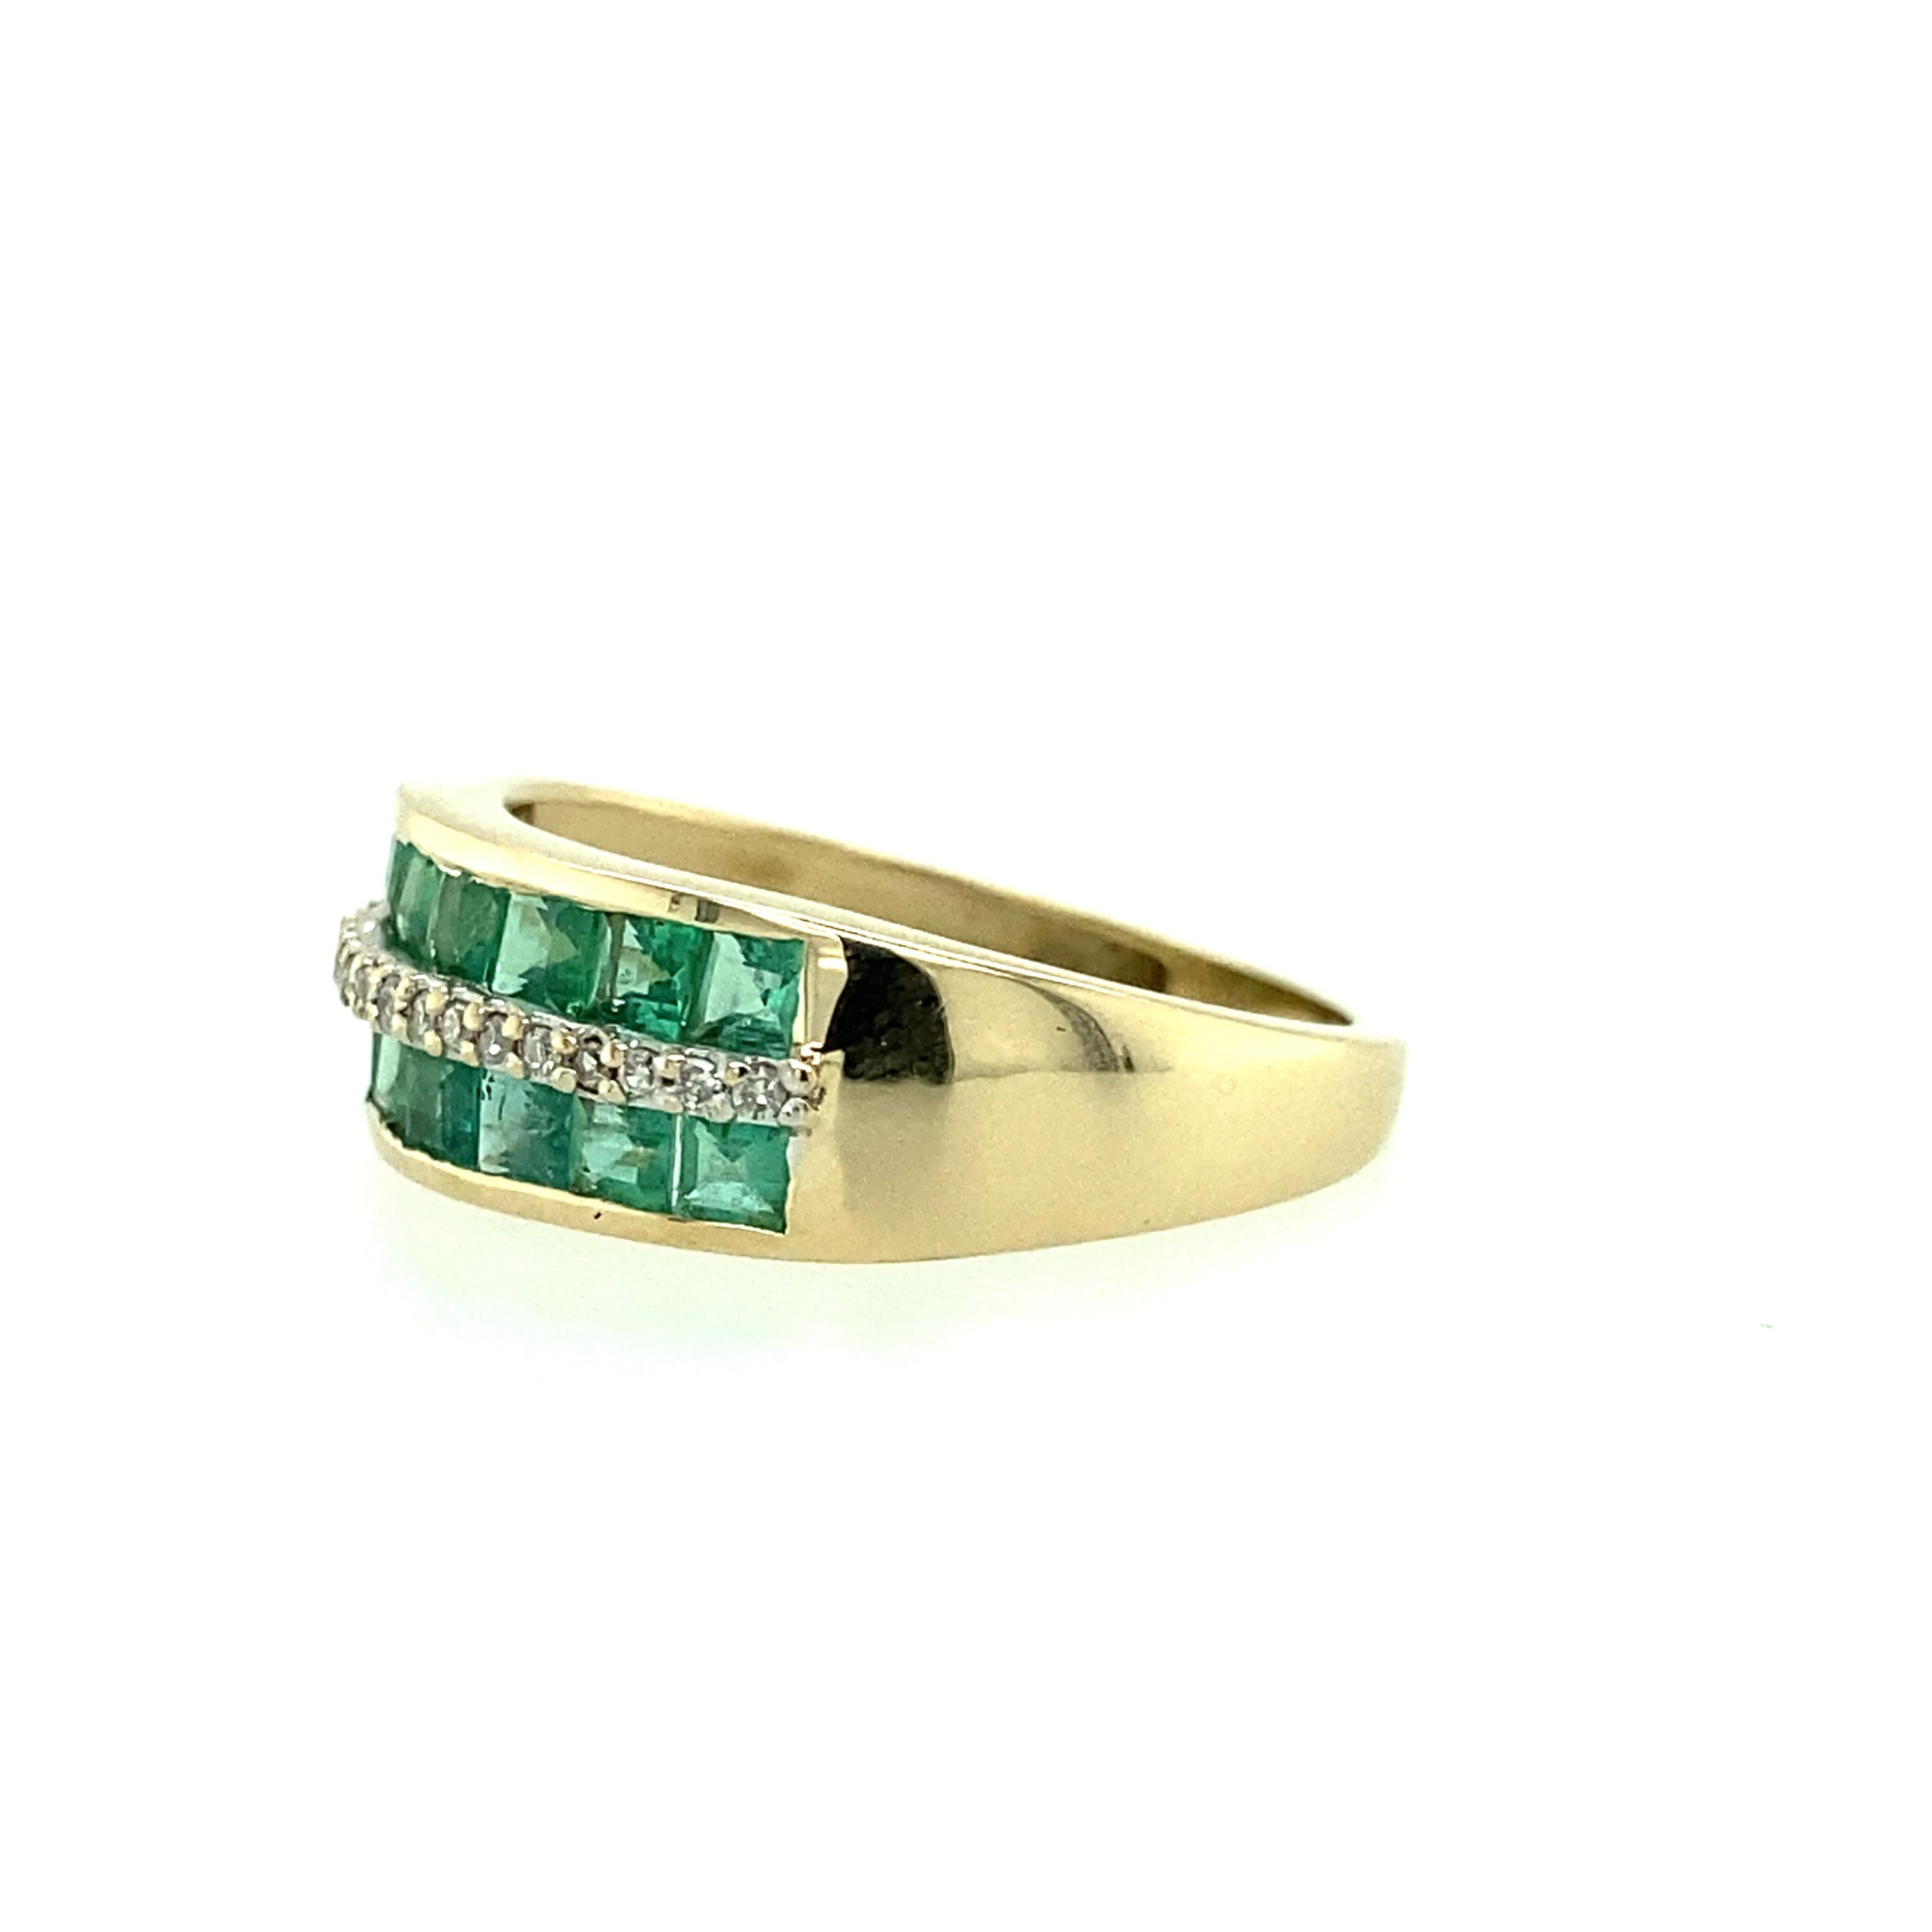 One 14 karat yellow gold (stamped STS 14K) emerald and diamond ring, channel set with sixteen 2mm square cut natural emeralds and eighteen full cut diamonds, 0.10 carat total weight with matching I/J color and I clarity.  The shank measures 6.29mm